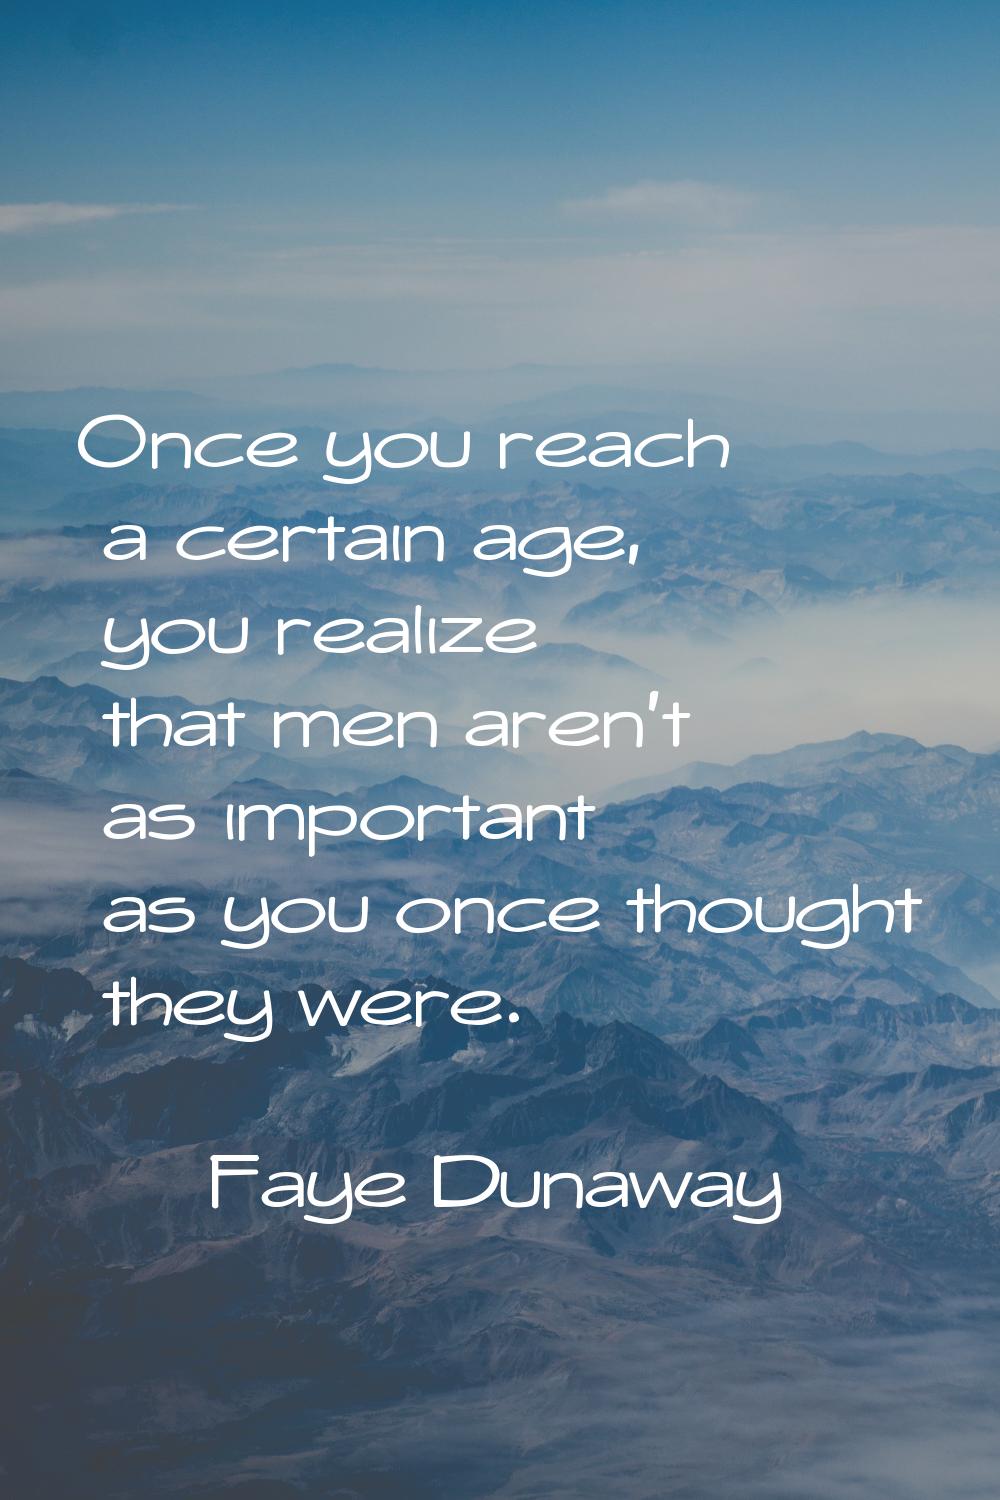 Once you reach a certain age, you realize that men aren't as important as you once thought they wer